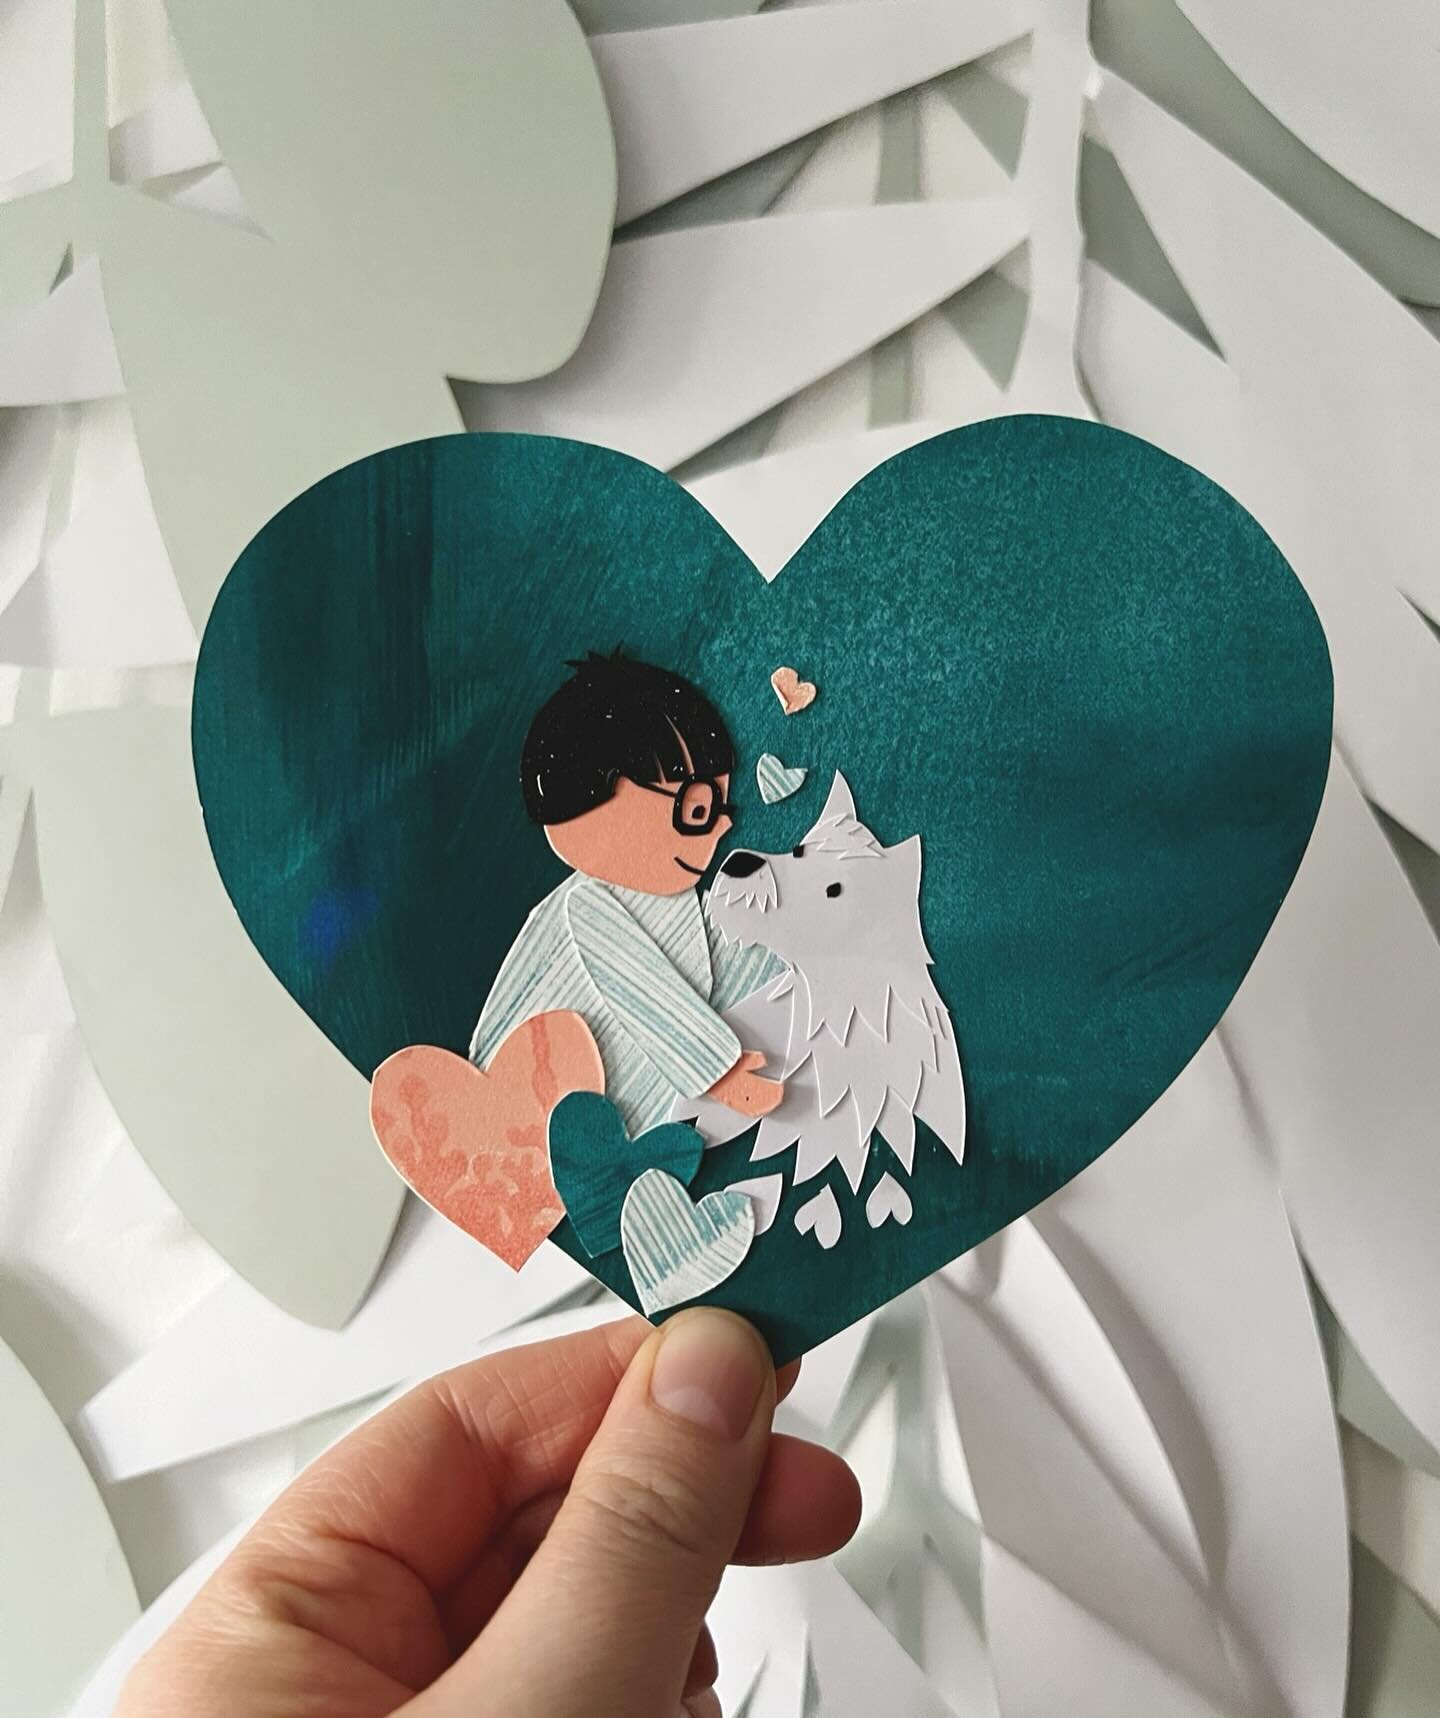 Happy Valentines Day. Sending everyone a little extra love today / especially to all the children in war torn countries. They need all our love right now. #emilyhogarth #papercut #childrensillustration